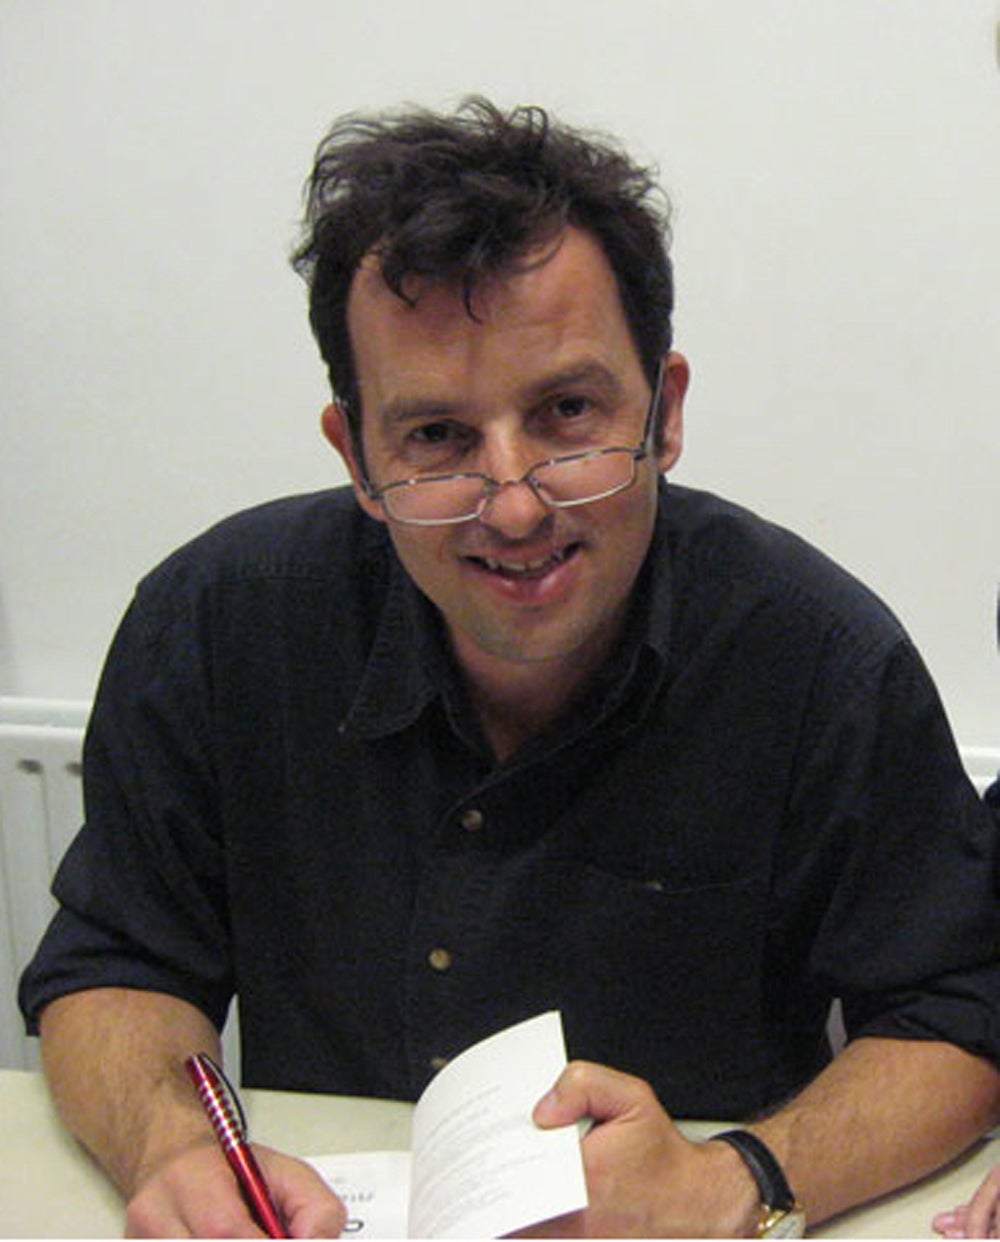 Author Alex Woolf at a book signing (Collect/PA Real Life)